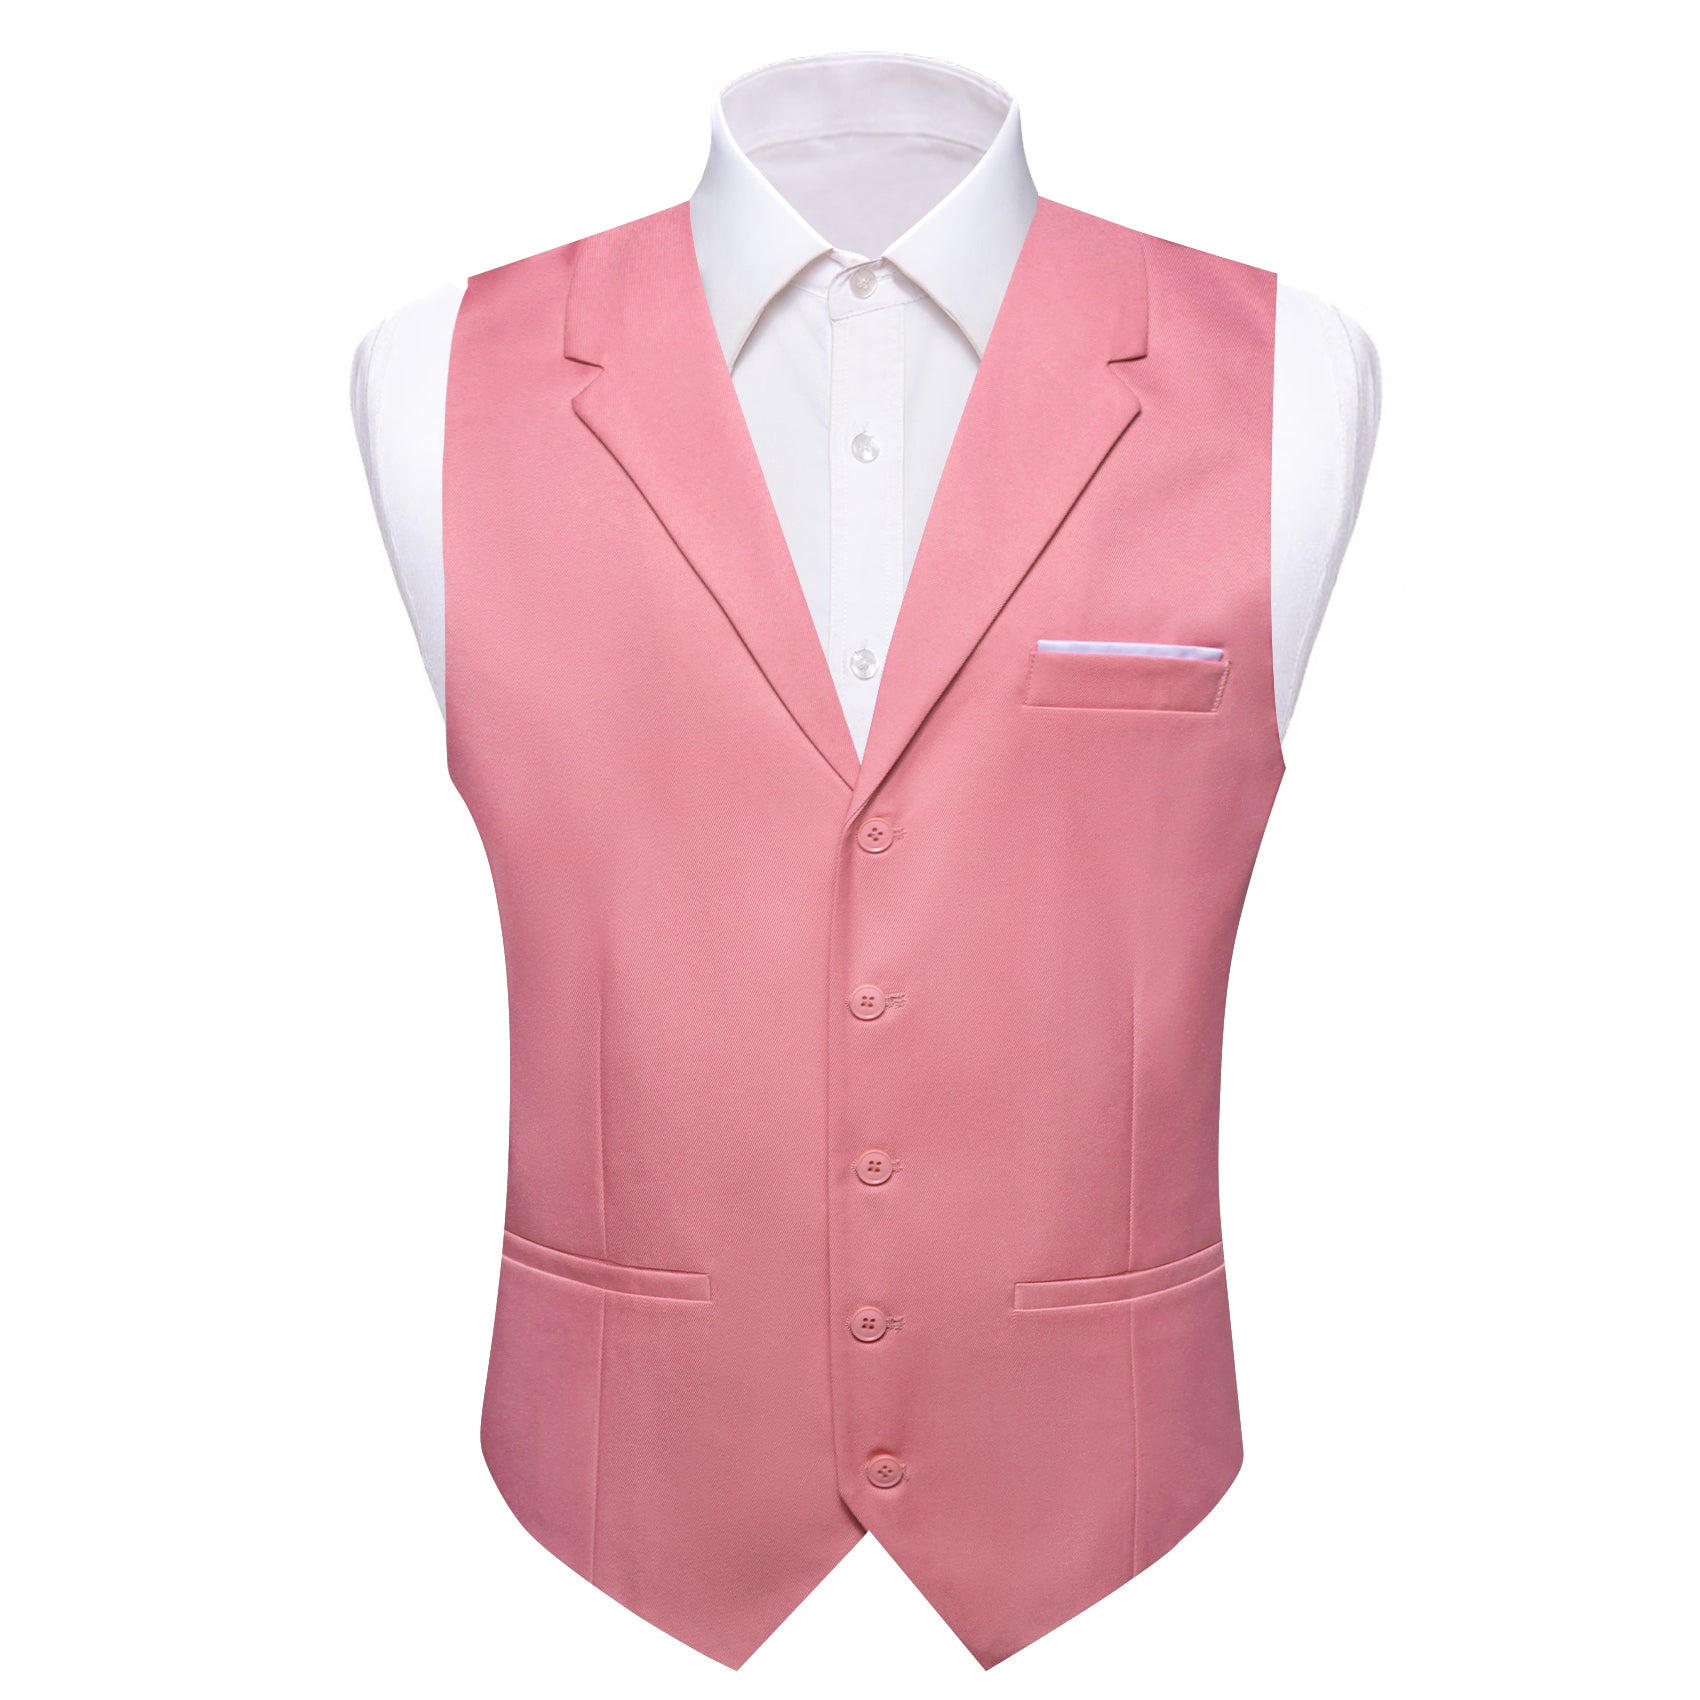 Barry.wang Men's Vest Pale Red Silk Solid Vest Notched Collar Waistcoat